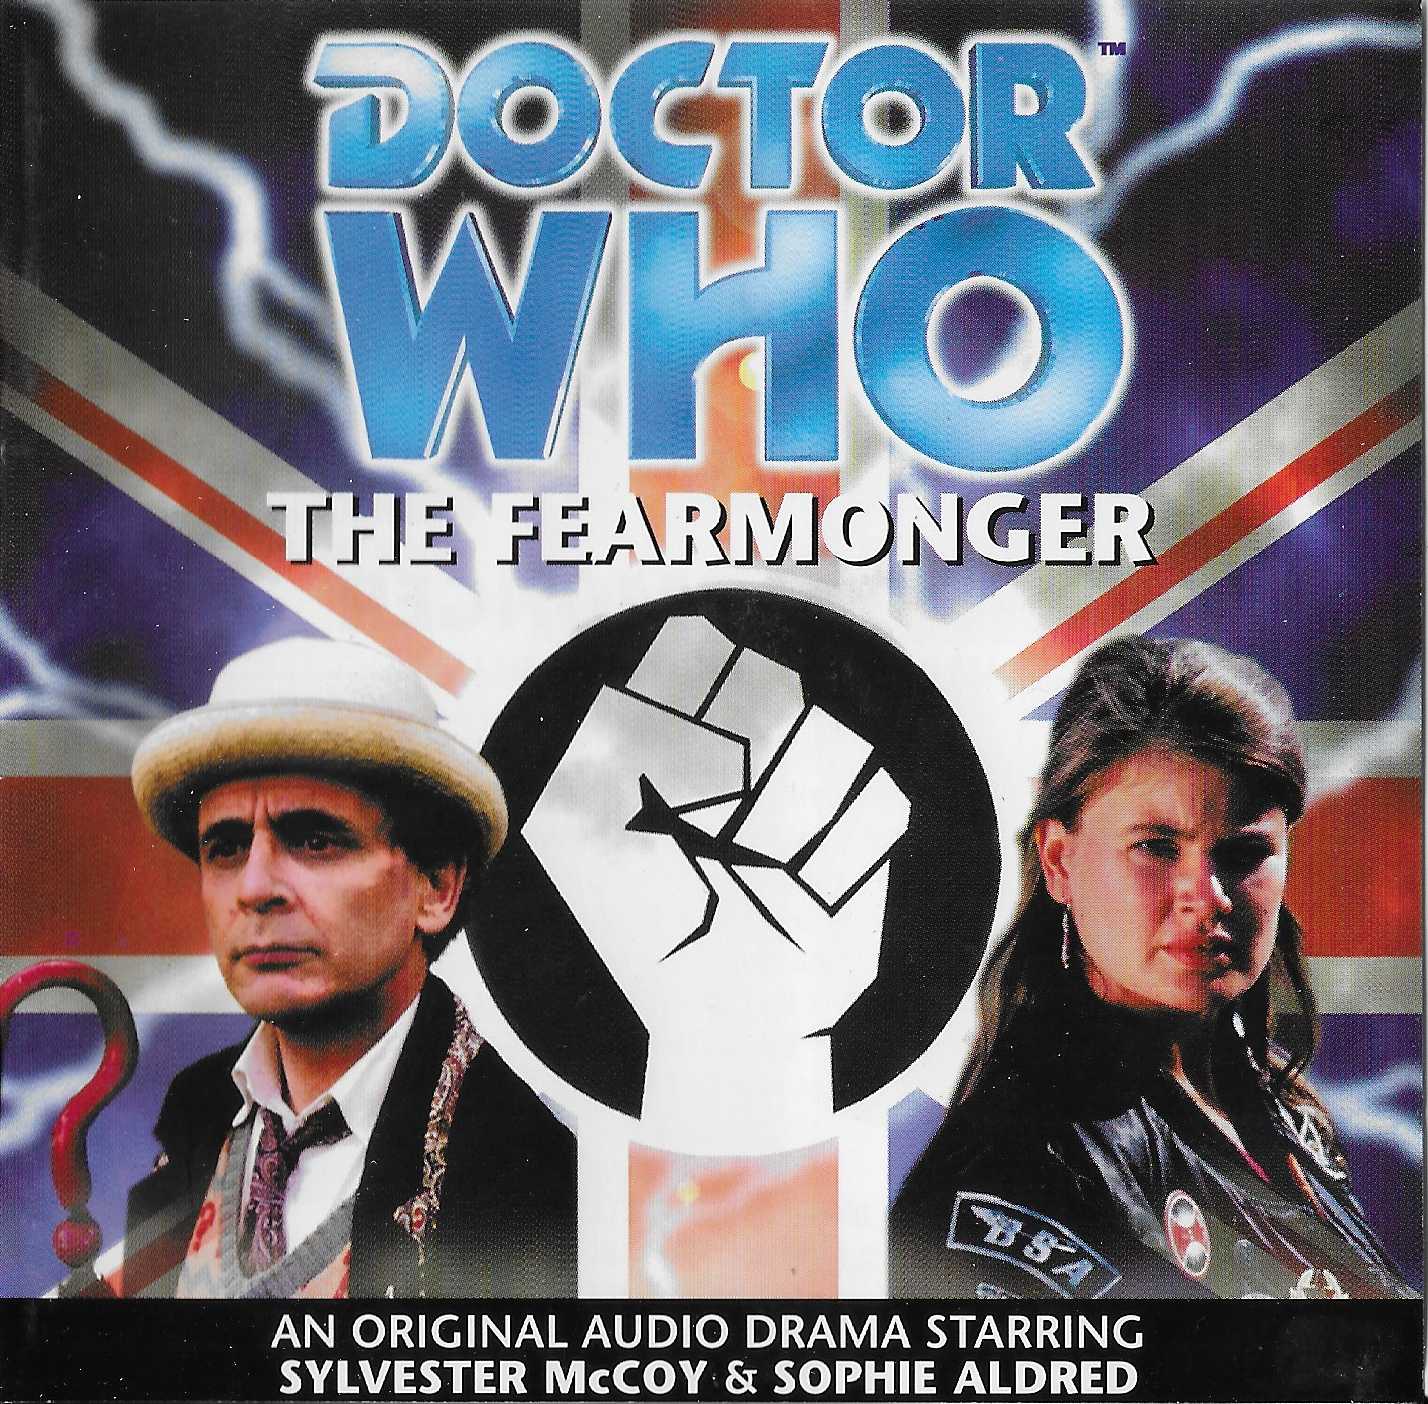 Picture of Doctor Who - The fearmonger by artist Jonathan Blum from the BBC cds - Records and Tapes library